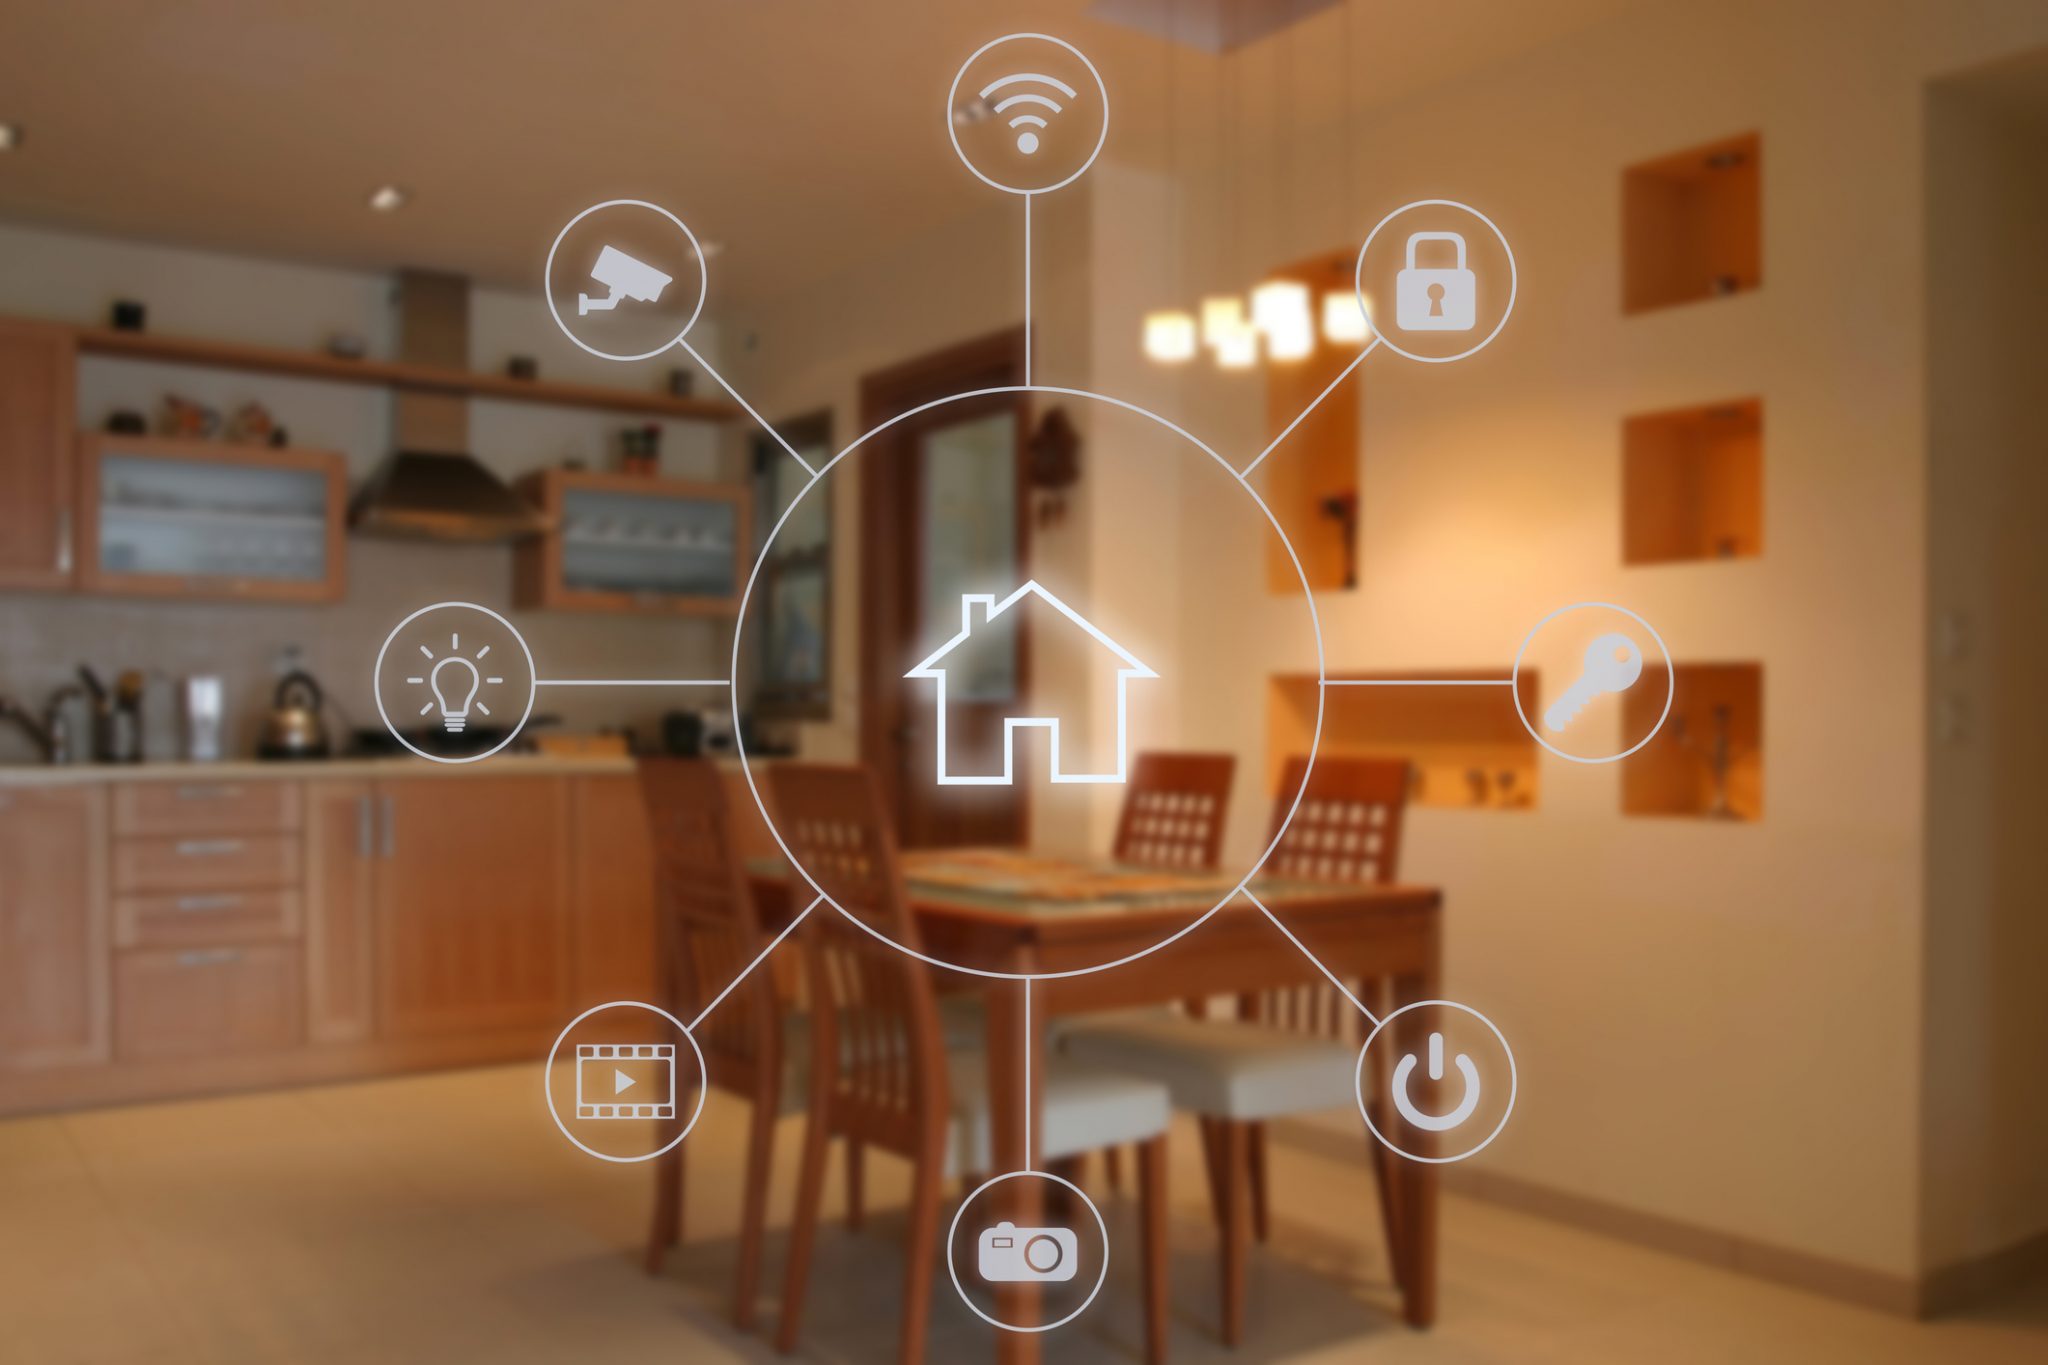 Kitchen with smart home icons overlaid